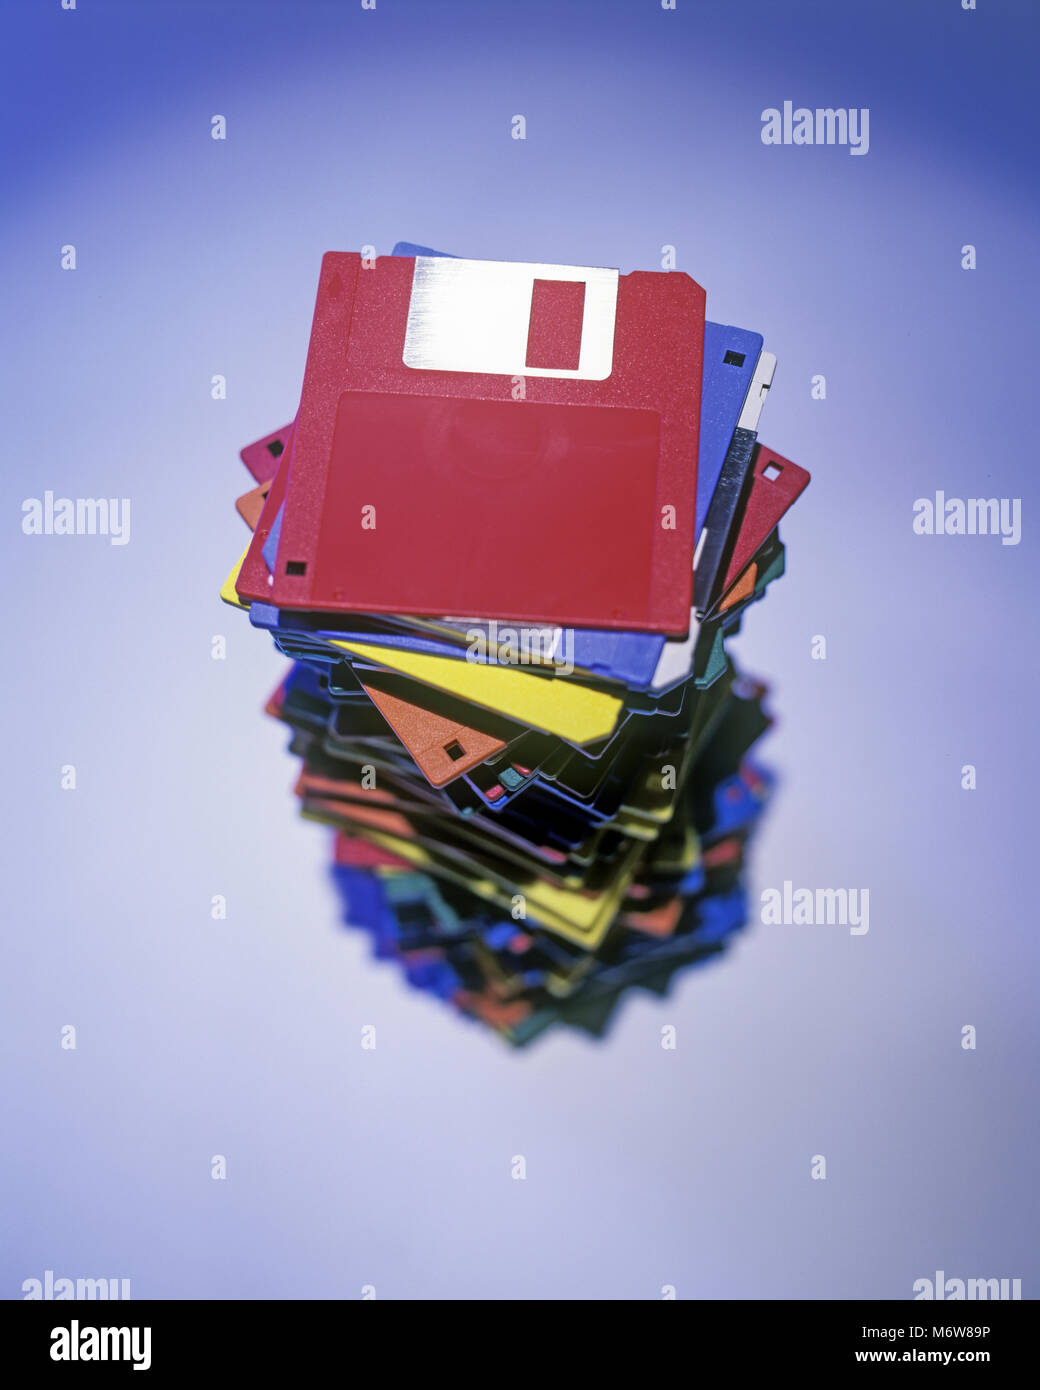 1997 HISTORICAL STACK OF 3.5 INCH PERSONAL COMPUTER DISKETTES (©IBM 1982) Stock Photo